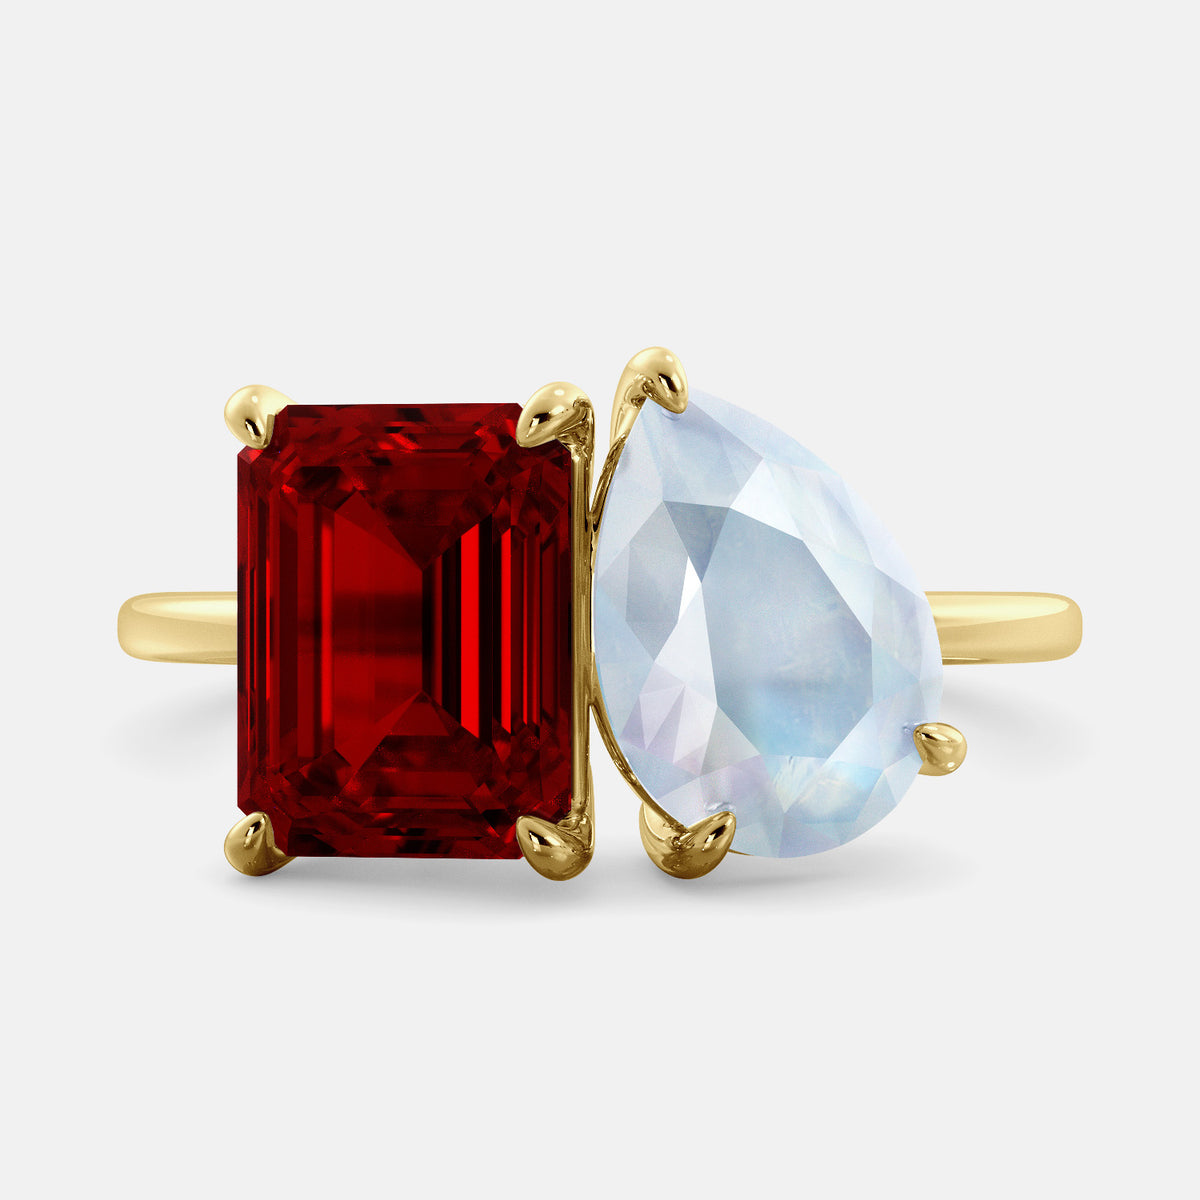 A toi et moi ring with a ruby stone in emerald cut and a pear-shaped stone. The ruby is a deep red color and the pear-shaped stone can be customized to represent the birth month stone of the wearer or a loved one. The ring is made of 14k gold and is available in all sizes. This ring is a perfect gift for any occasion, and it can be customized to make it truly unique.